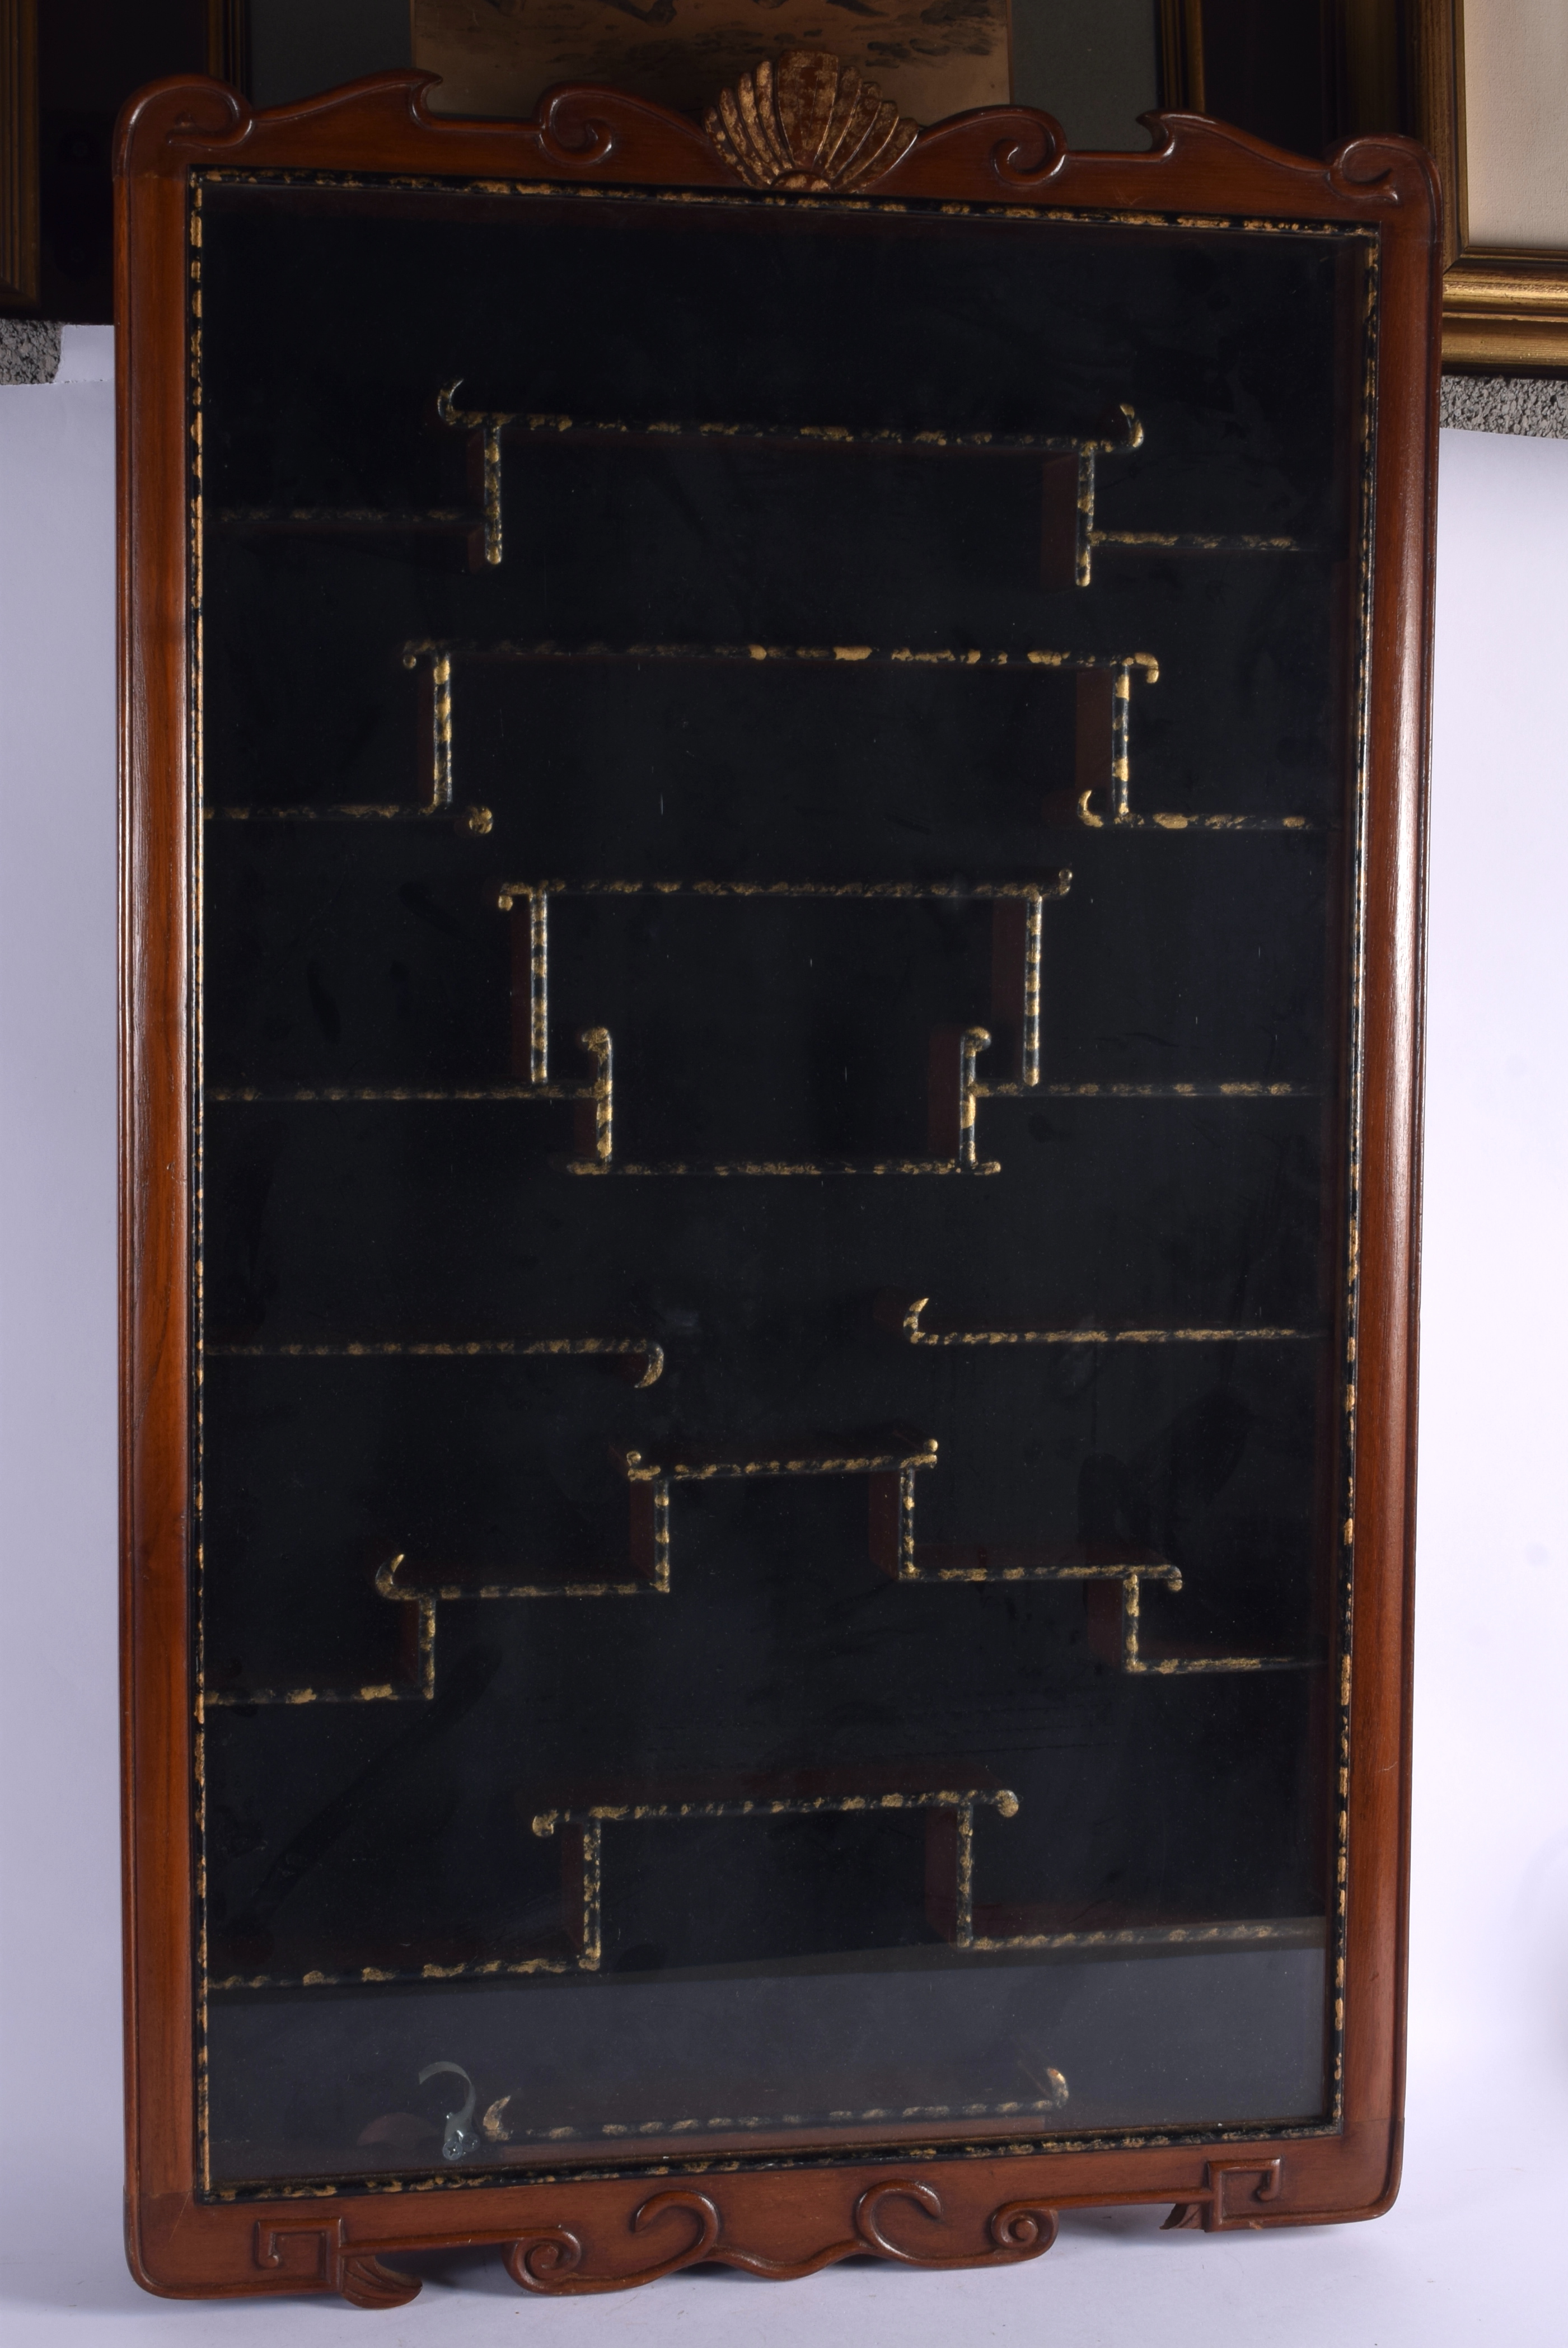 AN EARLY 20TH CENTURY CHINESE CARVED HARDWOOD SNUFF BOTTLE DISPLAY CABINET Late Qing/Republic. 80 cm